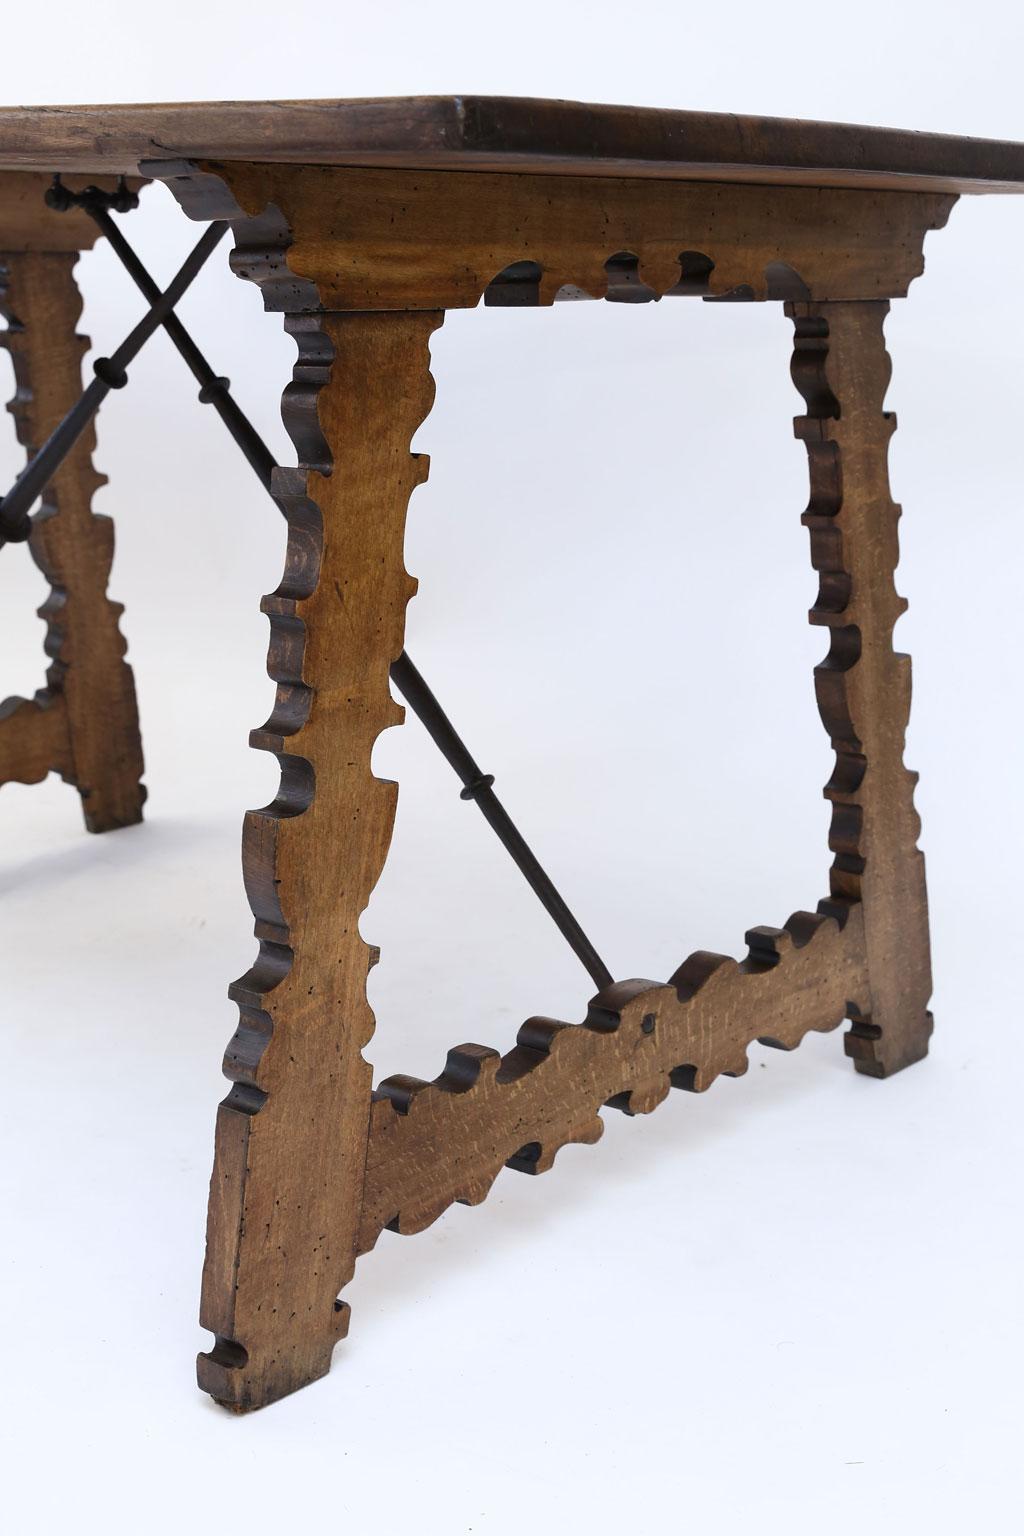 18th century Spanish table, Swietenia mahogany top (Cuban mahogany) raised upon thick hand carved quarter-sawn shaped legs. Nice forged iron under-strapping trestle support. Dates to late 18th century.